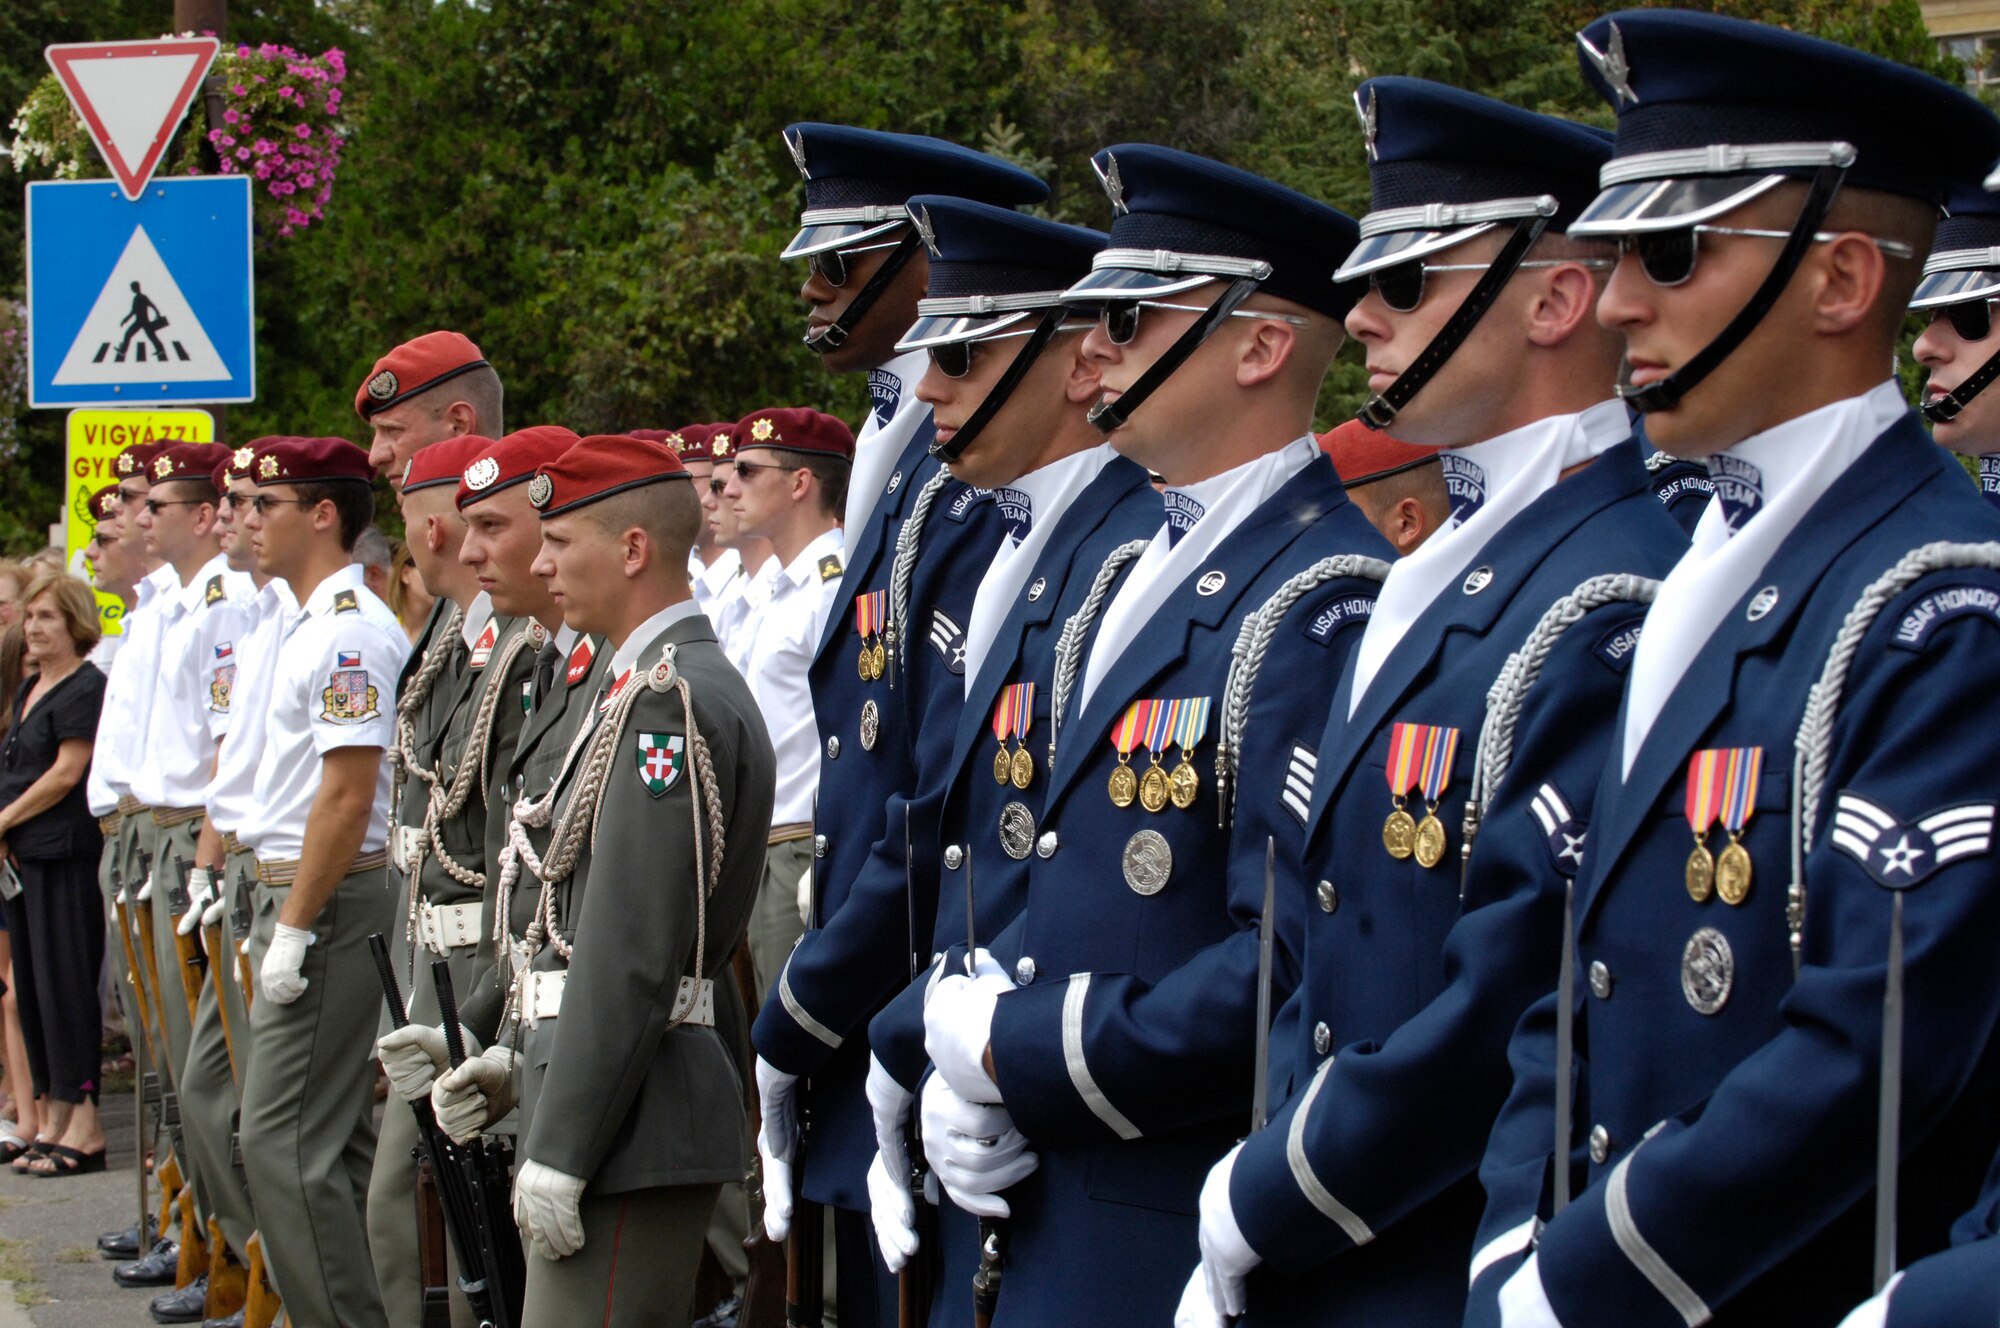 Members of the U.S. Air Force Honor Guard Drill Team stand next to armed forces representing the countries of Austria and the Czech Republic.  The Drill Team joined other countries and represented the U.S. armed forces at the REGIMENTFEST in Szerenes, Hungary 28 July, 2007.  The Drill Team, the traveling component of the Air Force Honor Guard, is touring five US installations across three countries throughout central Europe this week. The Drill Team tours U.S. Air Force bases/events world wide showcasing the precision of the U.S. Air Force to recruit, retain and inspire Airmen for the U.S. Air Force mission. (U.S. Air Force Photo by Senior Airman Daniel R. DeCook)(Released)